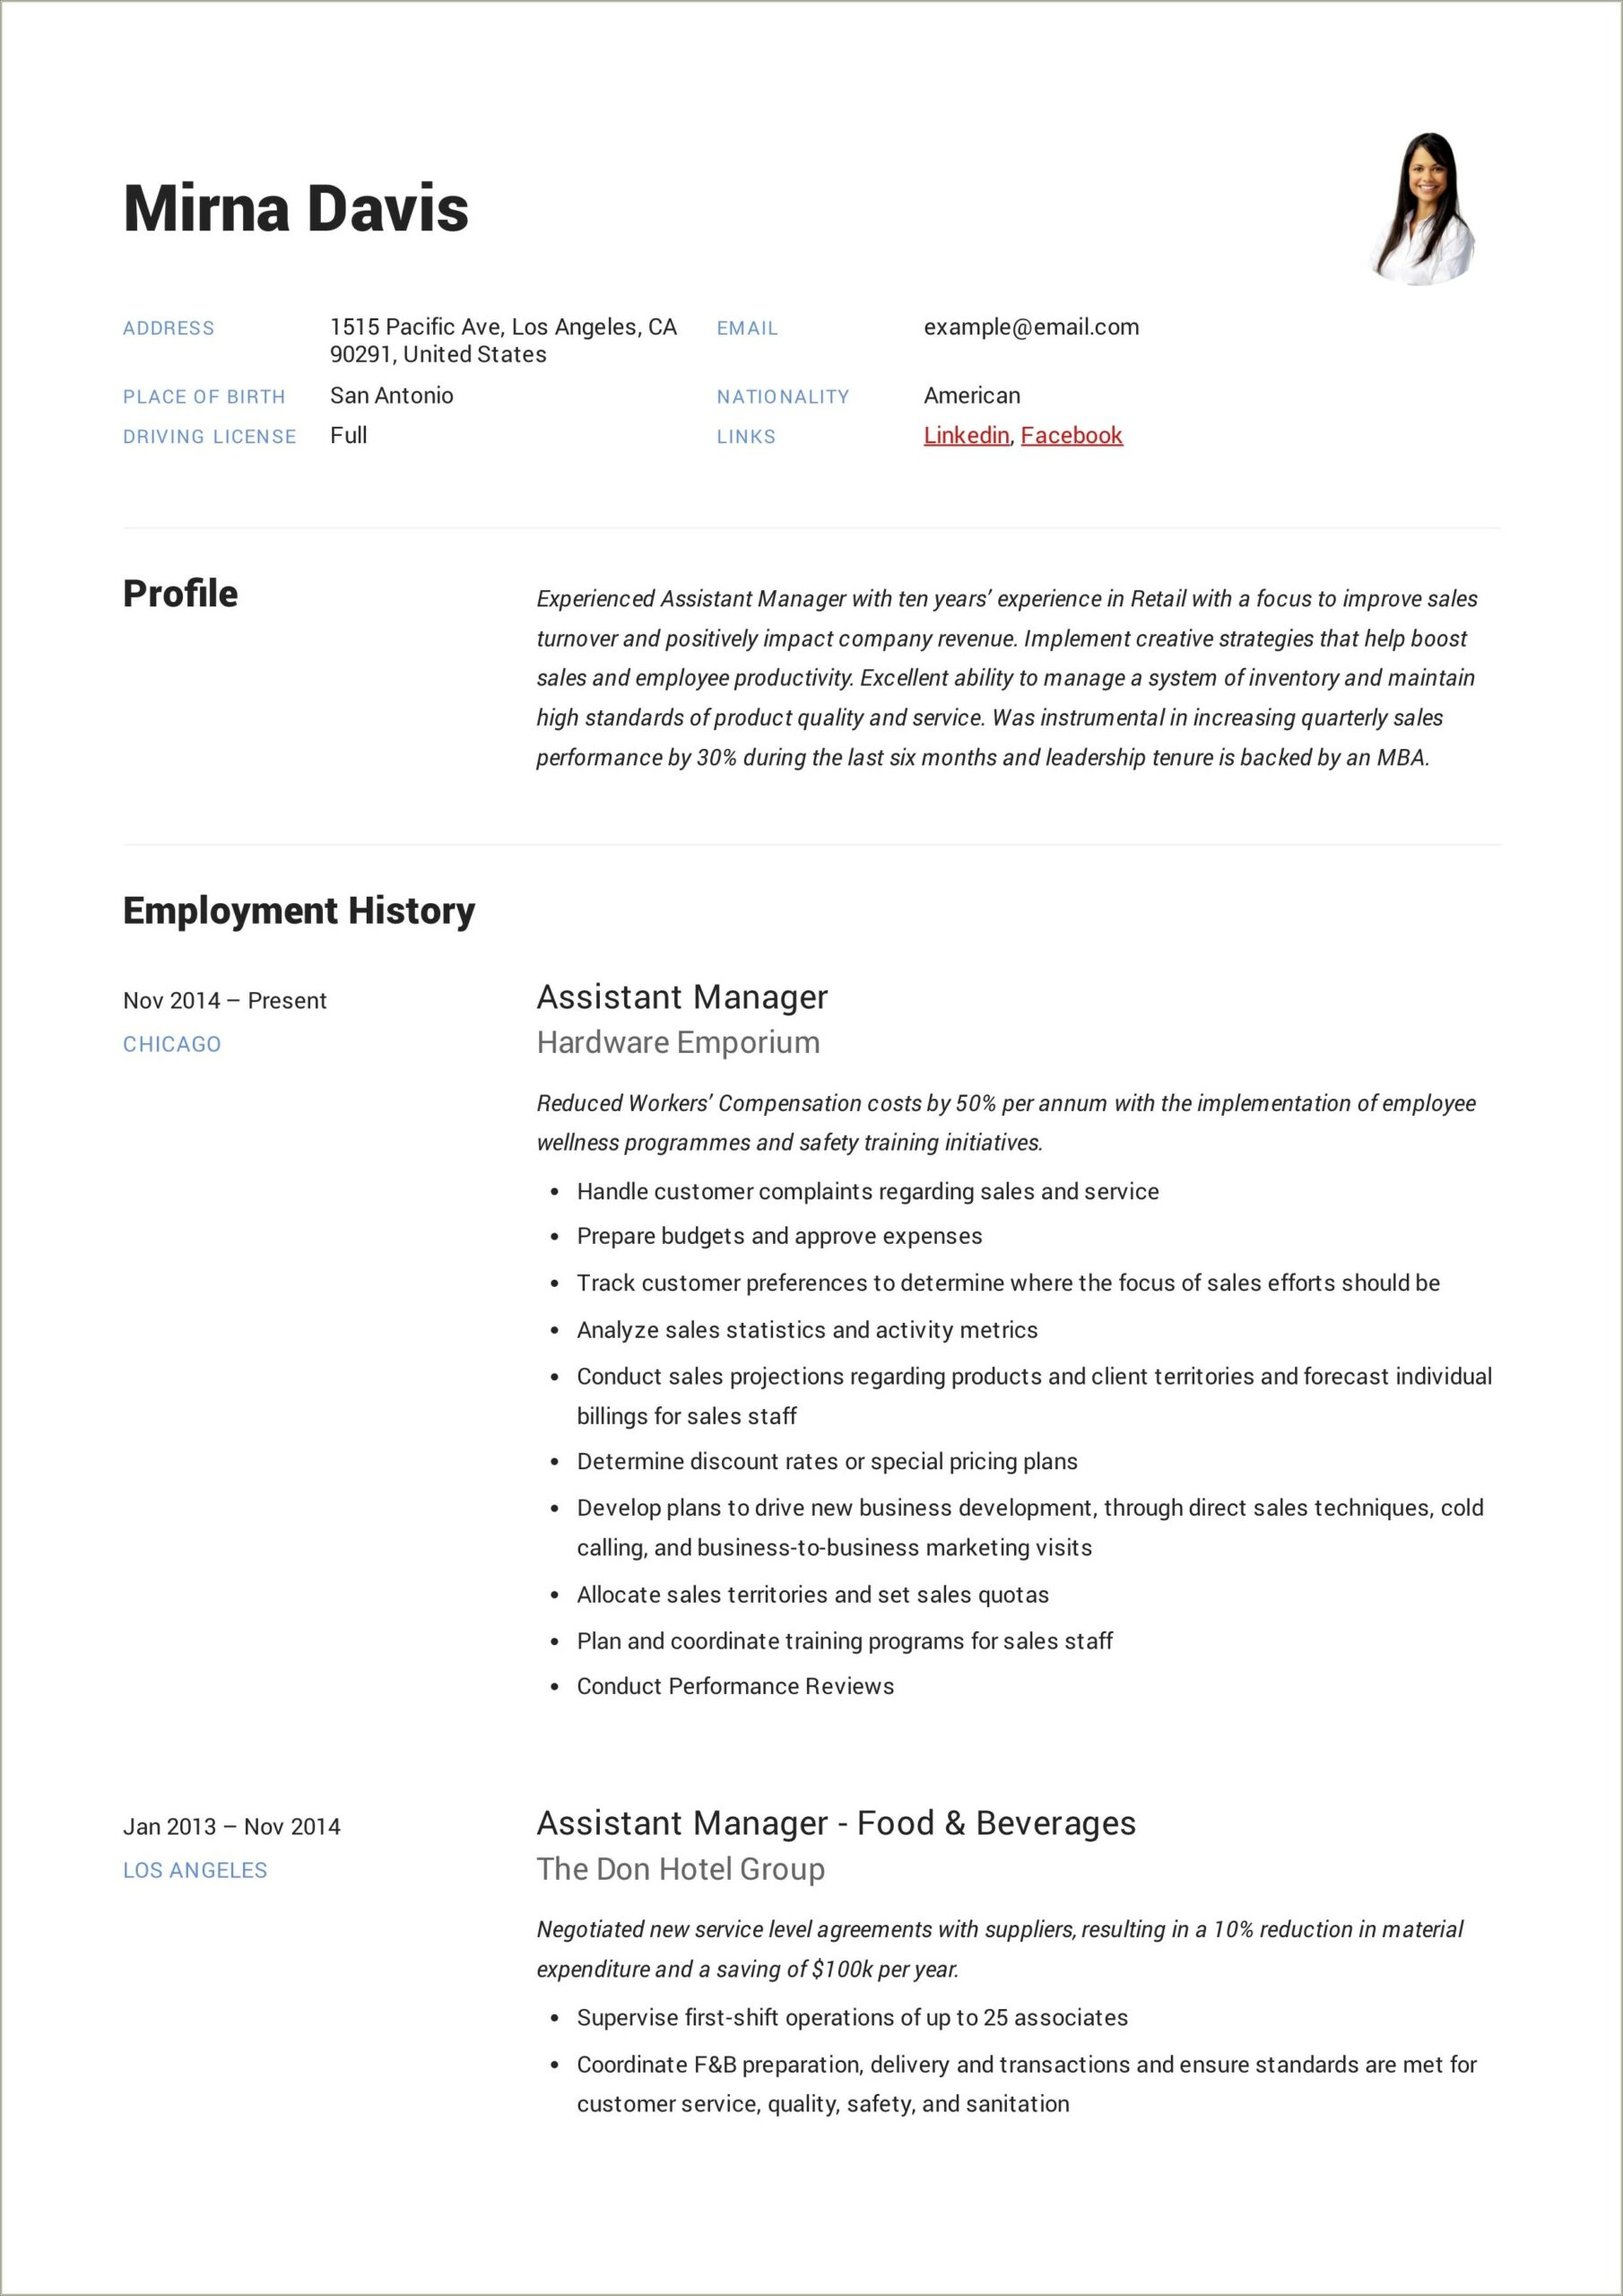 Resume Format For Assistant Manager Maintenance